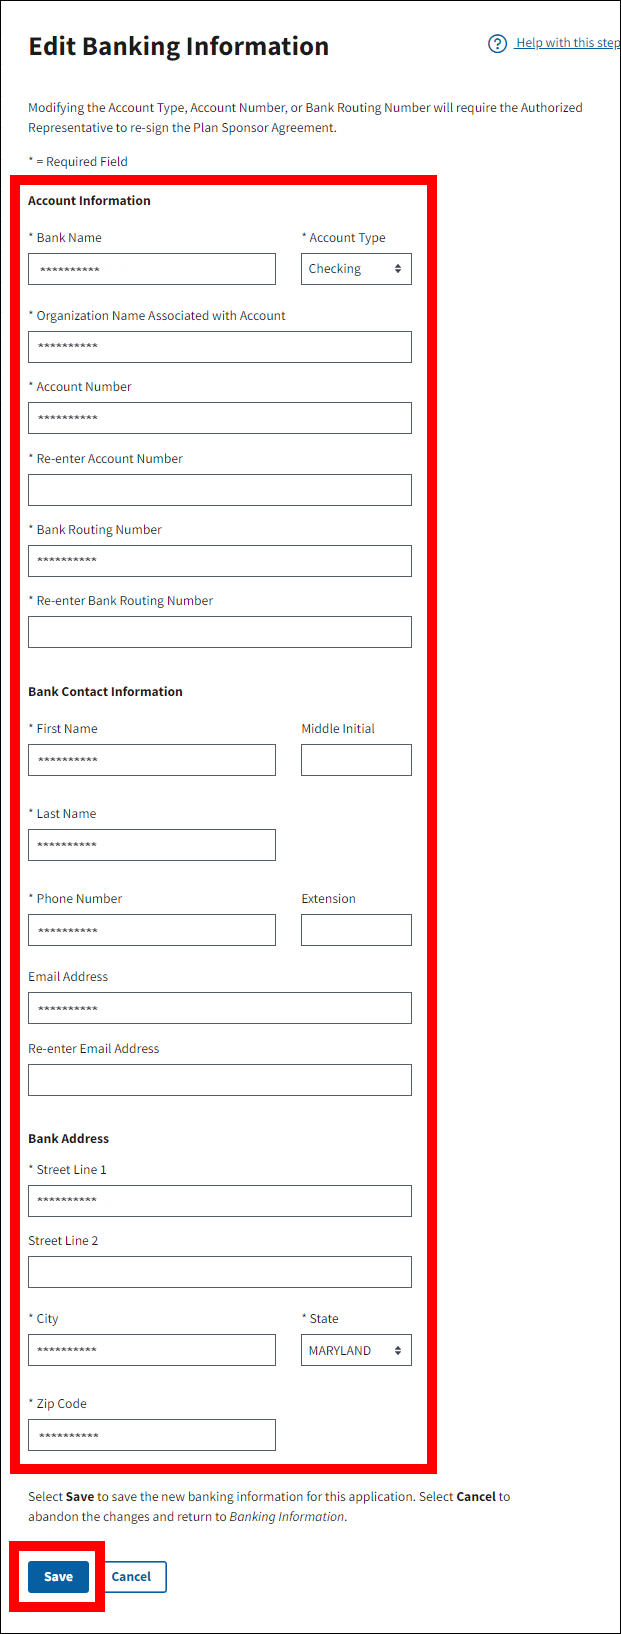 Edit Banking Information page with form fields and Save button highlighted.